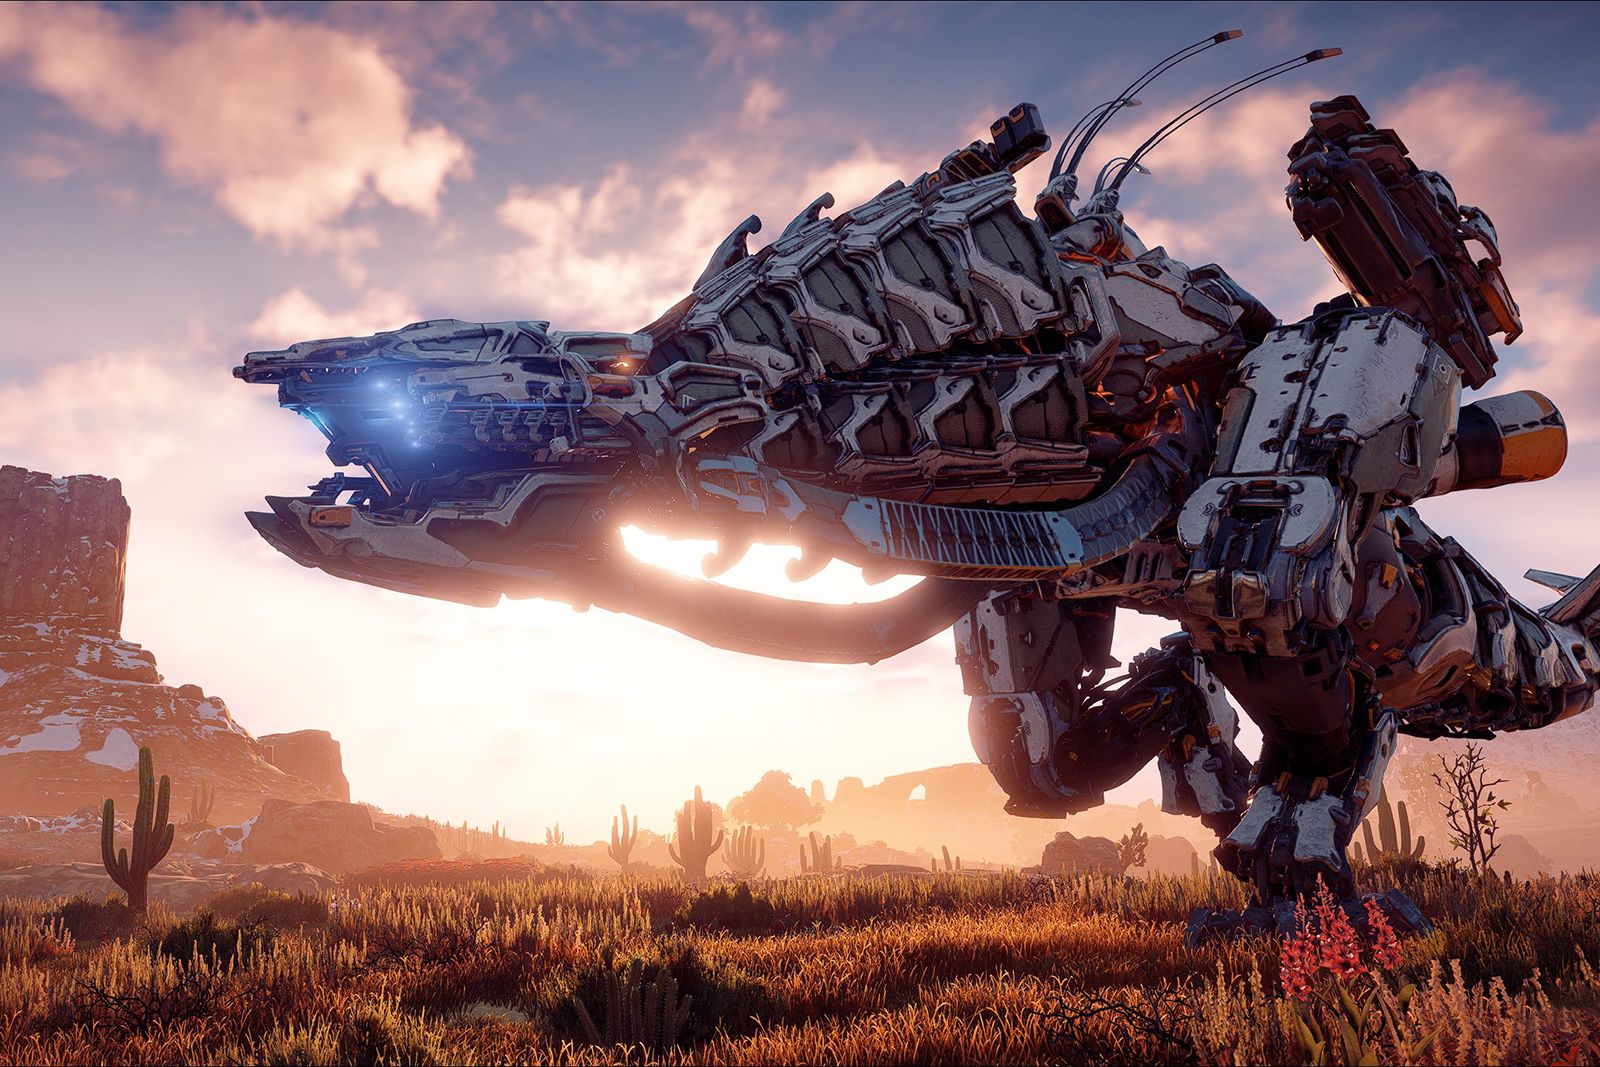 Horizon Zero Dawn breaks PS4 exclusive, hits PC in August with stunning visual upgrade photo 1